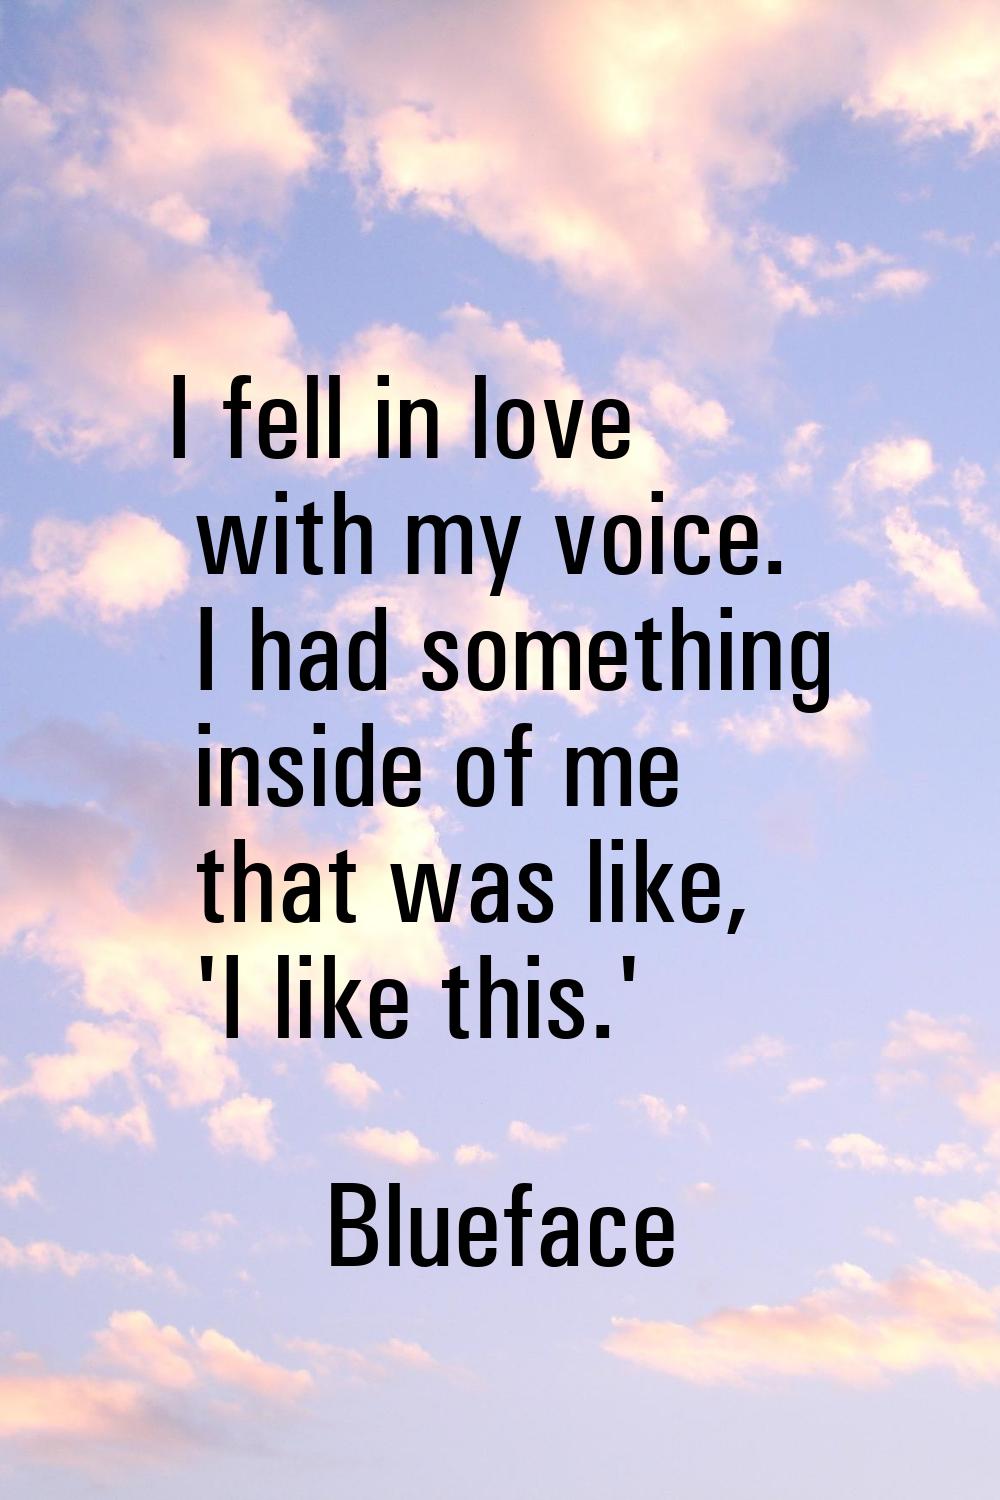 I fell in love with my voice. I had something inside of me that was like, 'I like this.'